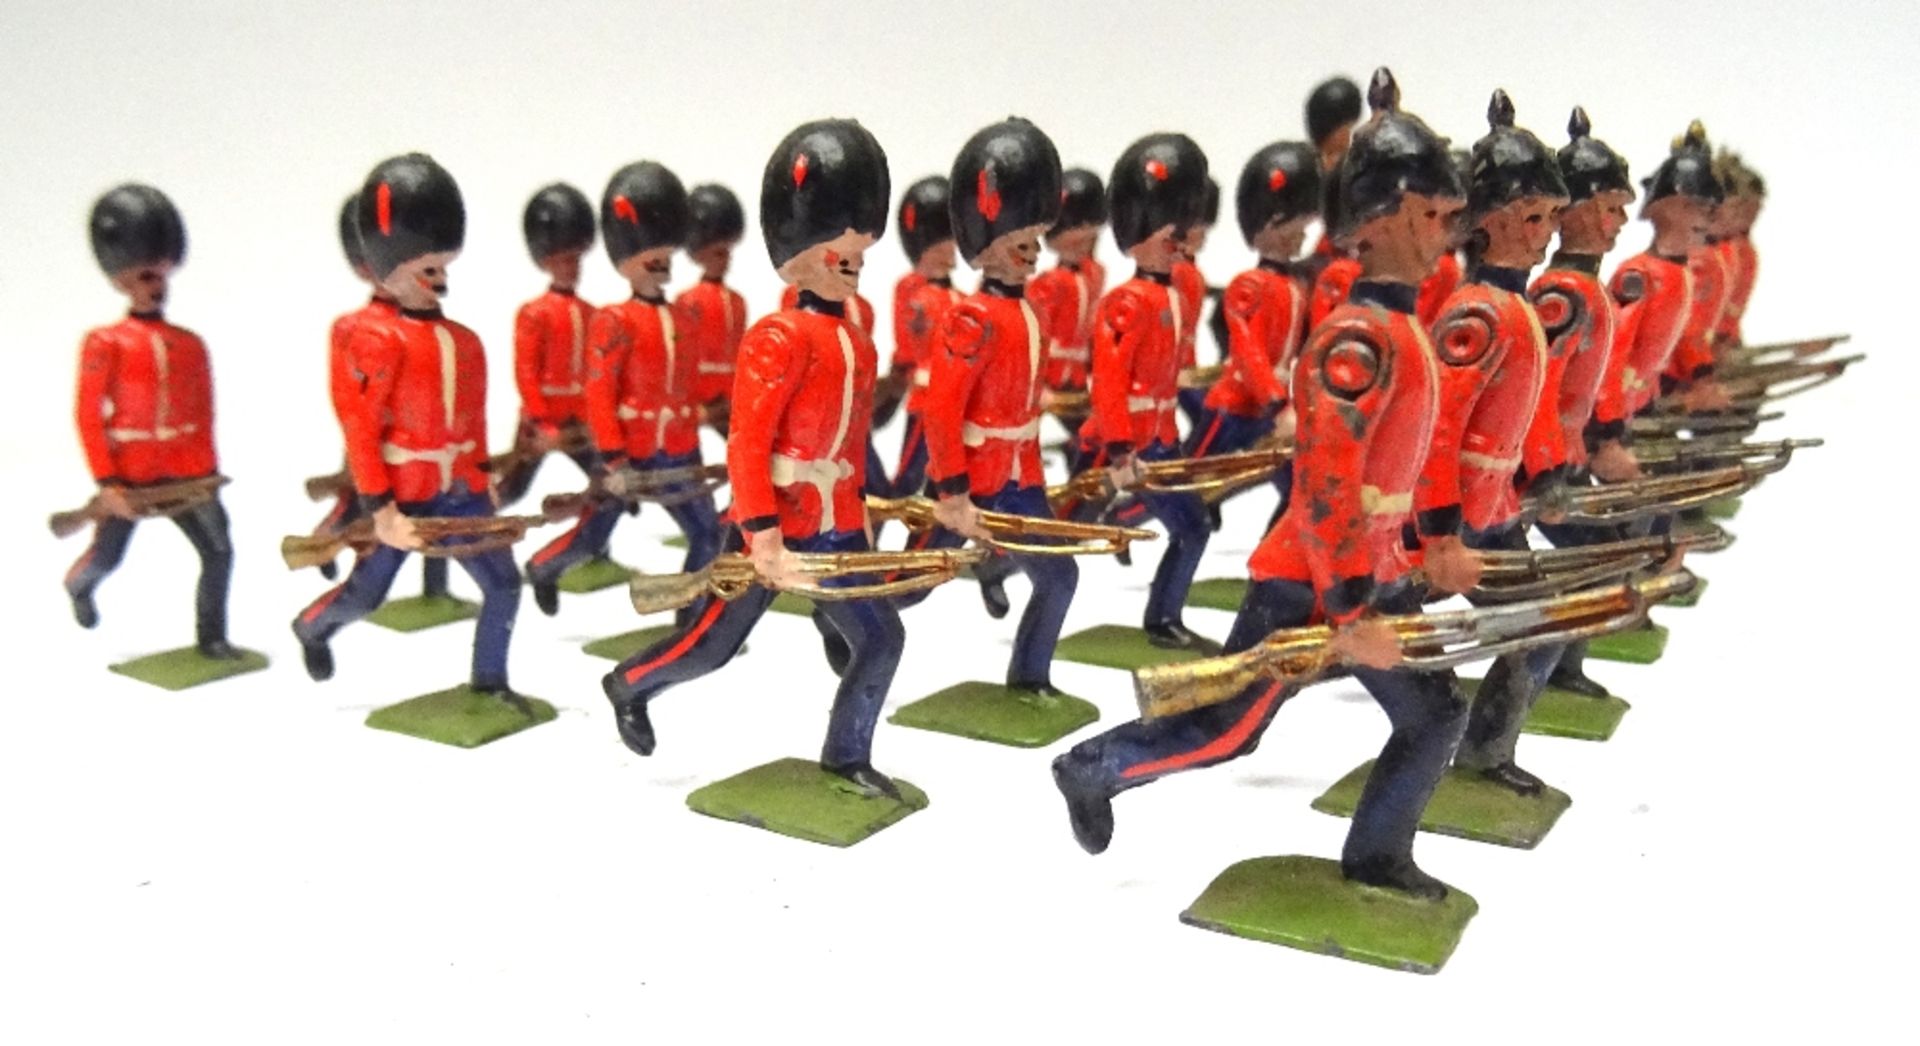 Britains closed elbow figures running at the trail - Image 7 of 7